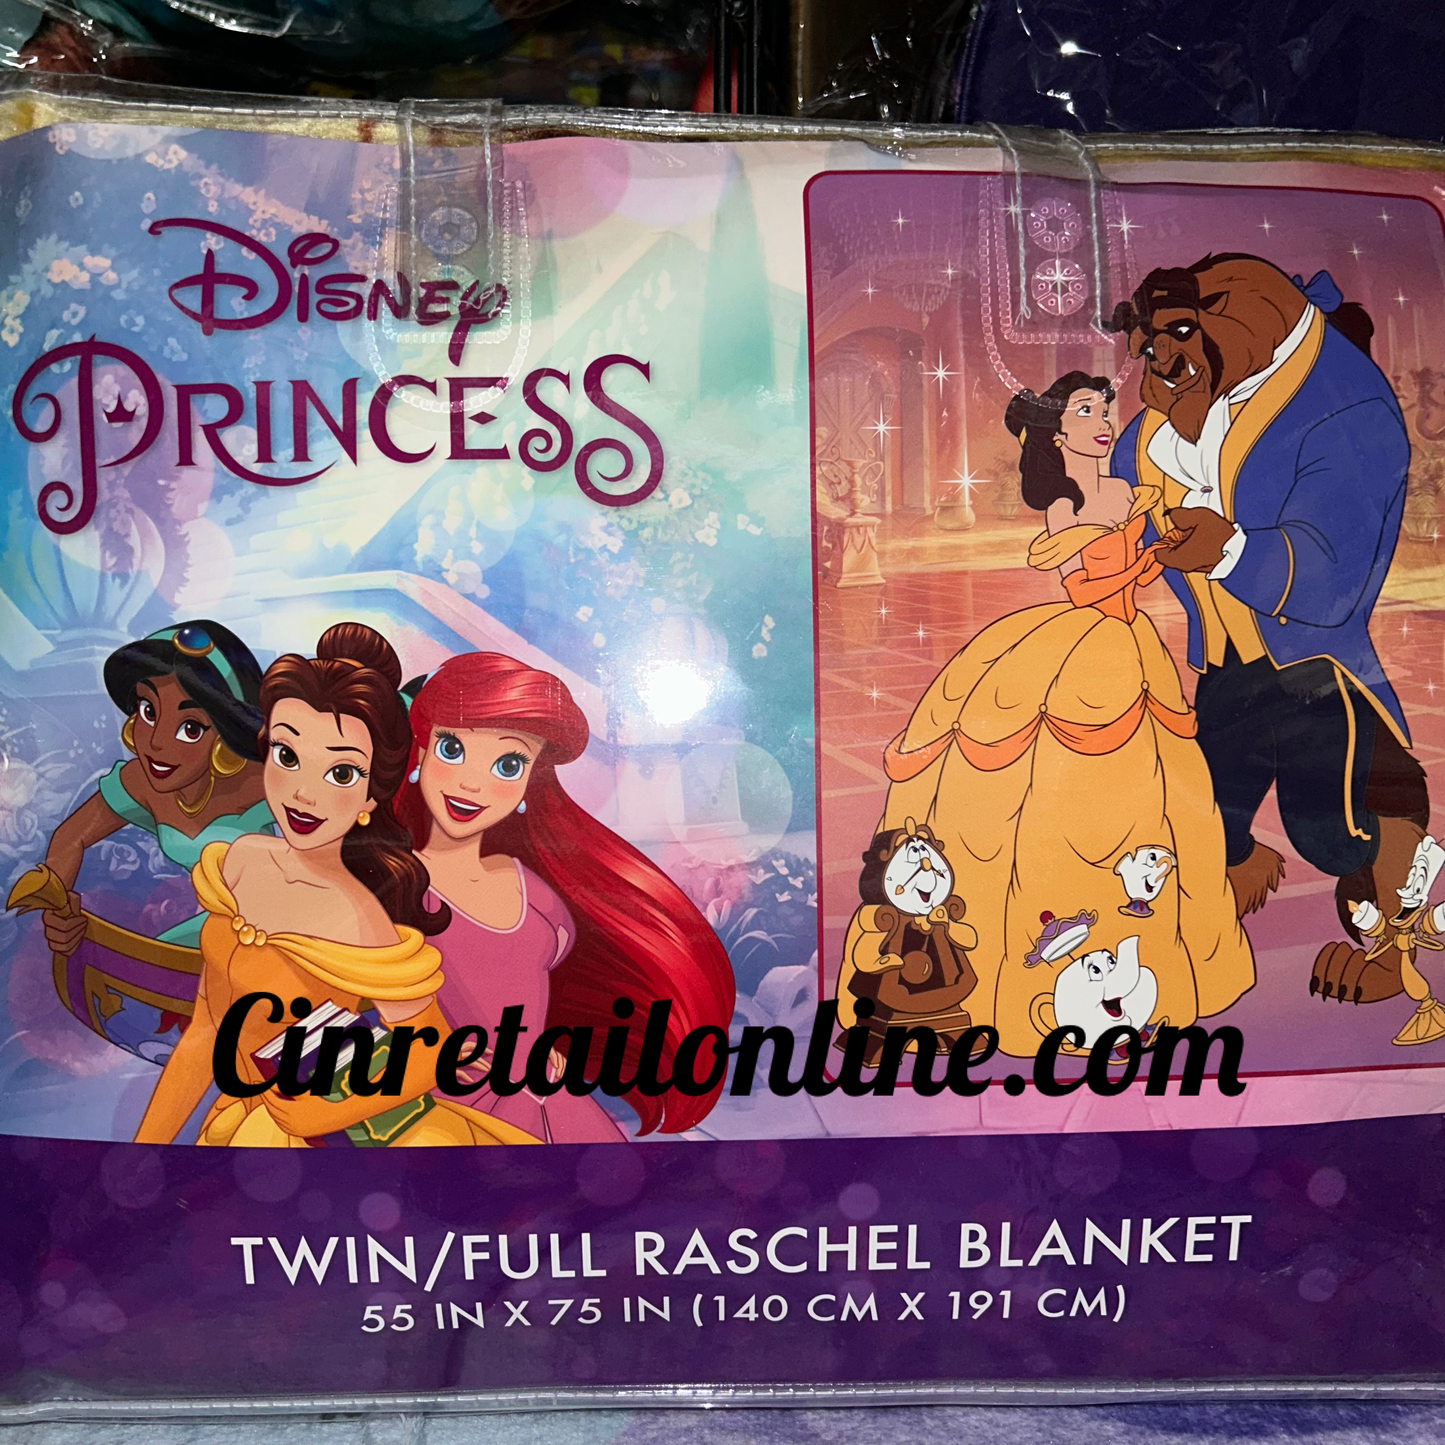 Beauty and the Beast twin/full blanket